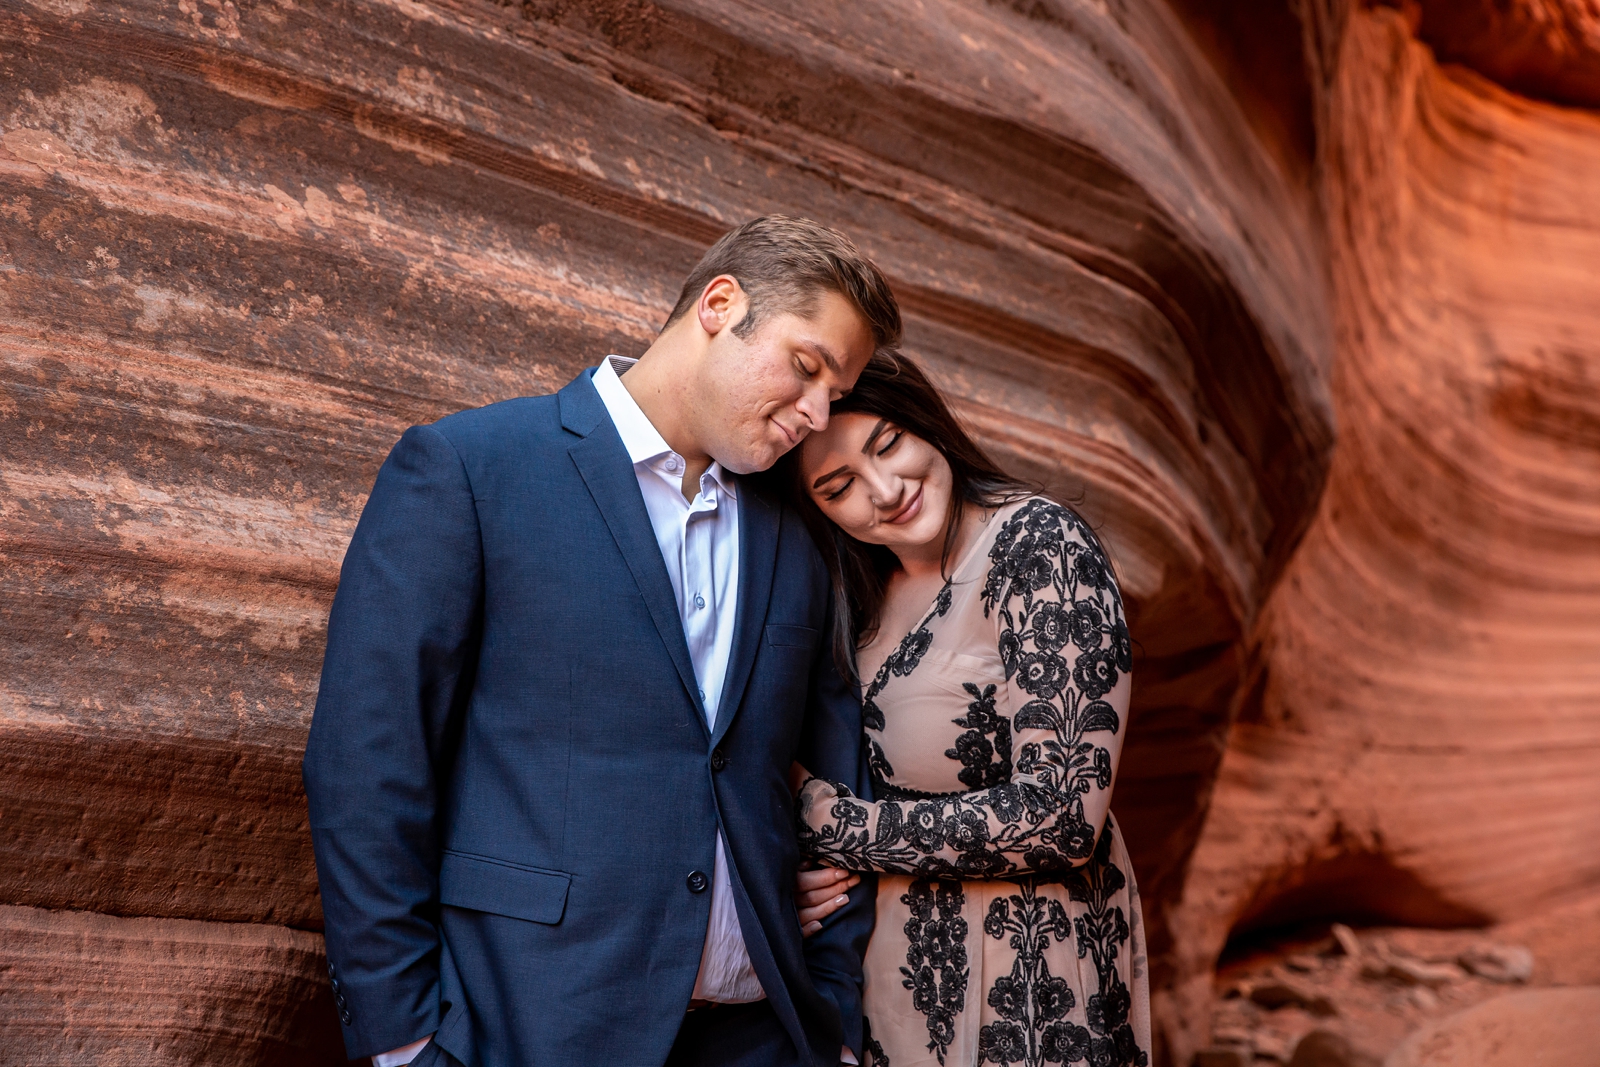 Engaged lovers cuddling in a red rocks slot canyon.